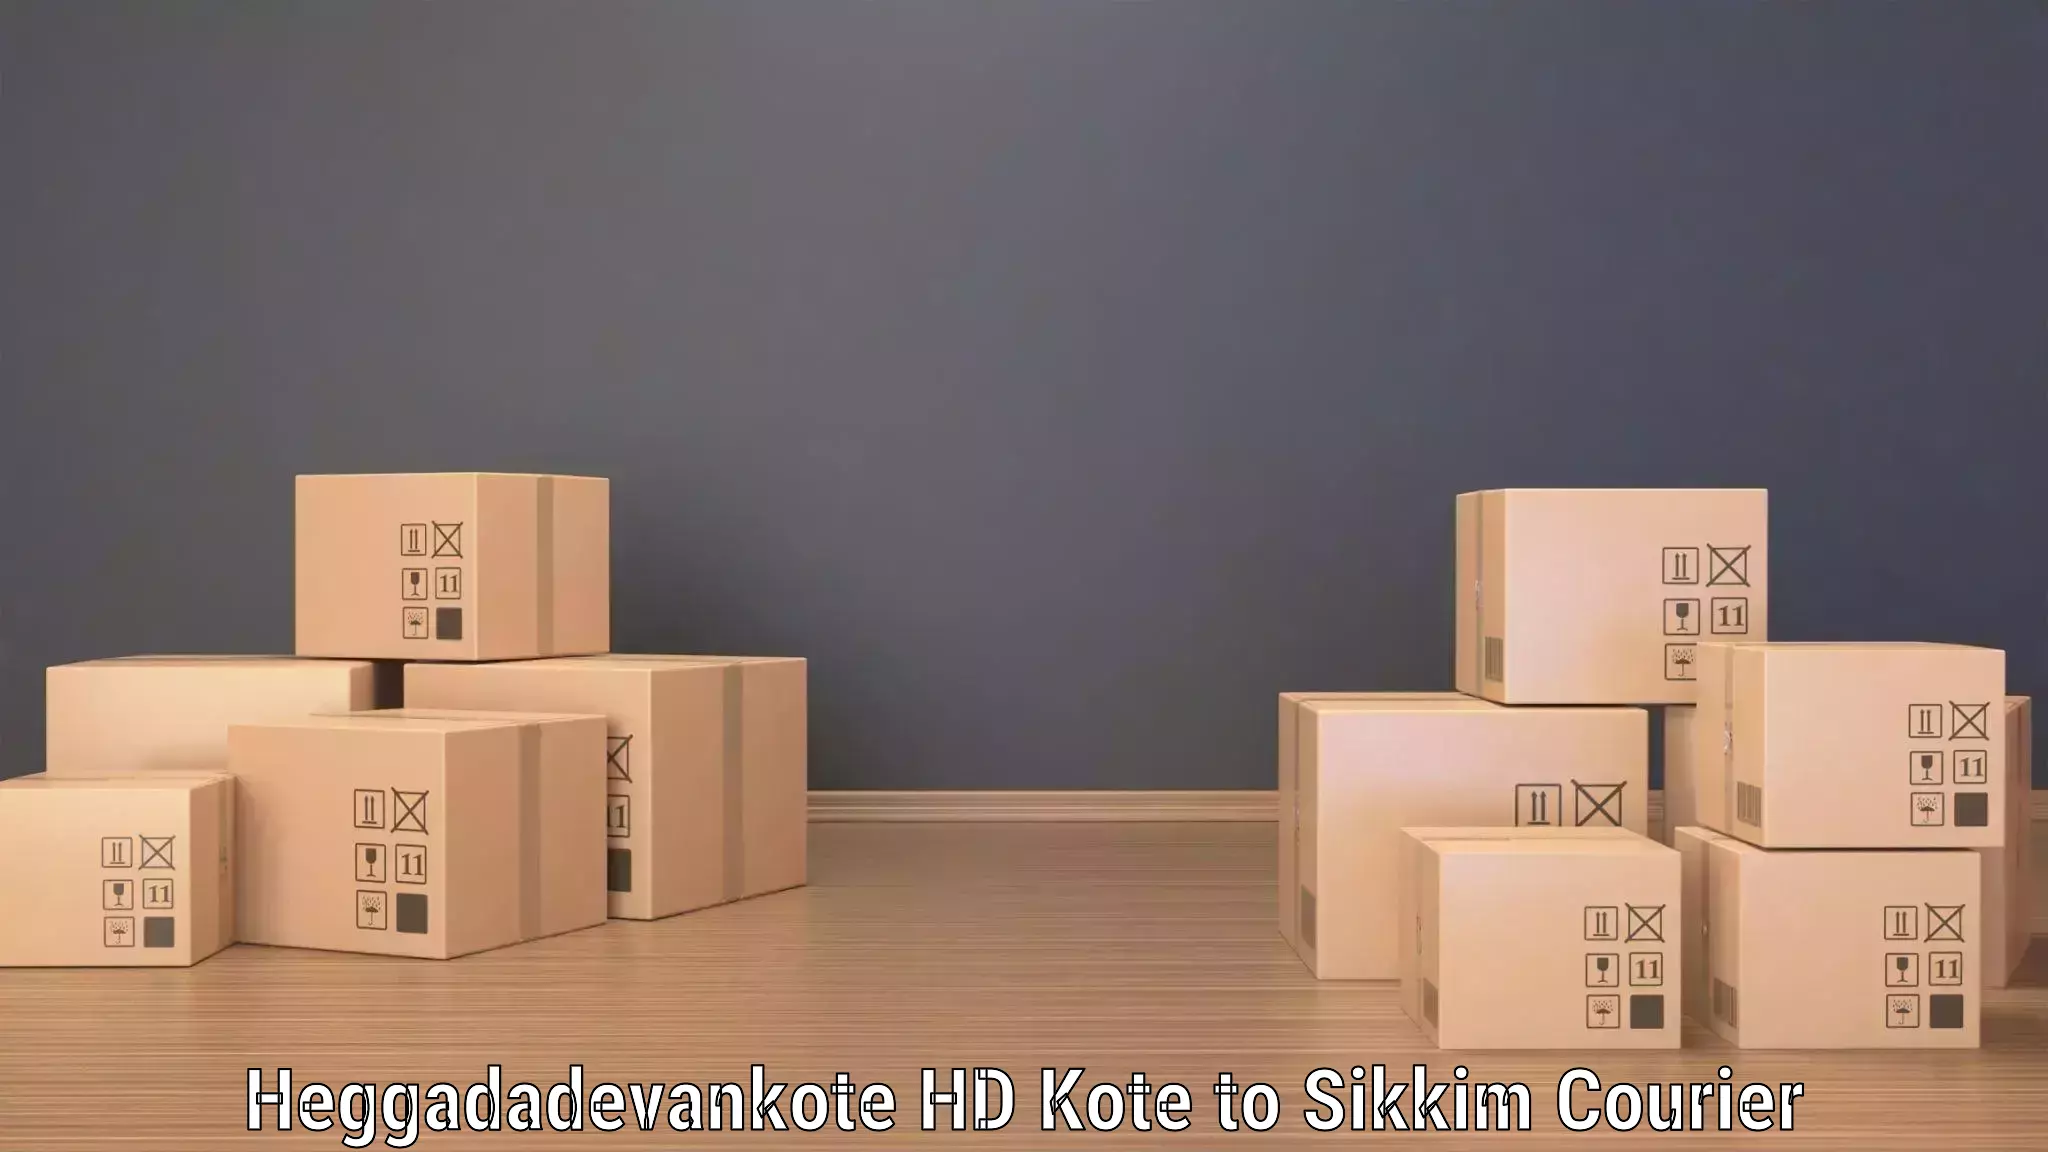 Reliable delivery network Heggadadevankote HD Kote to Geyzing